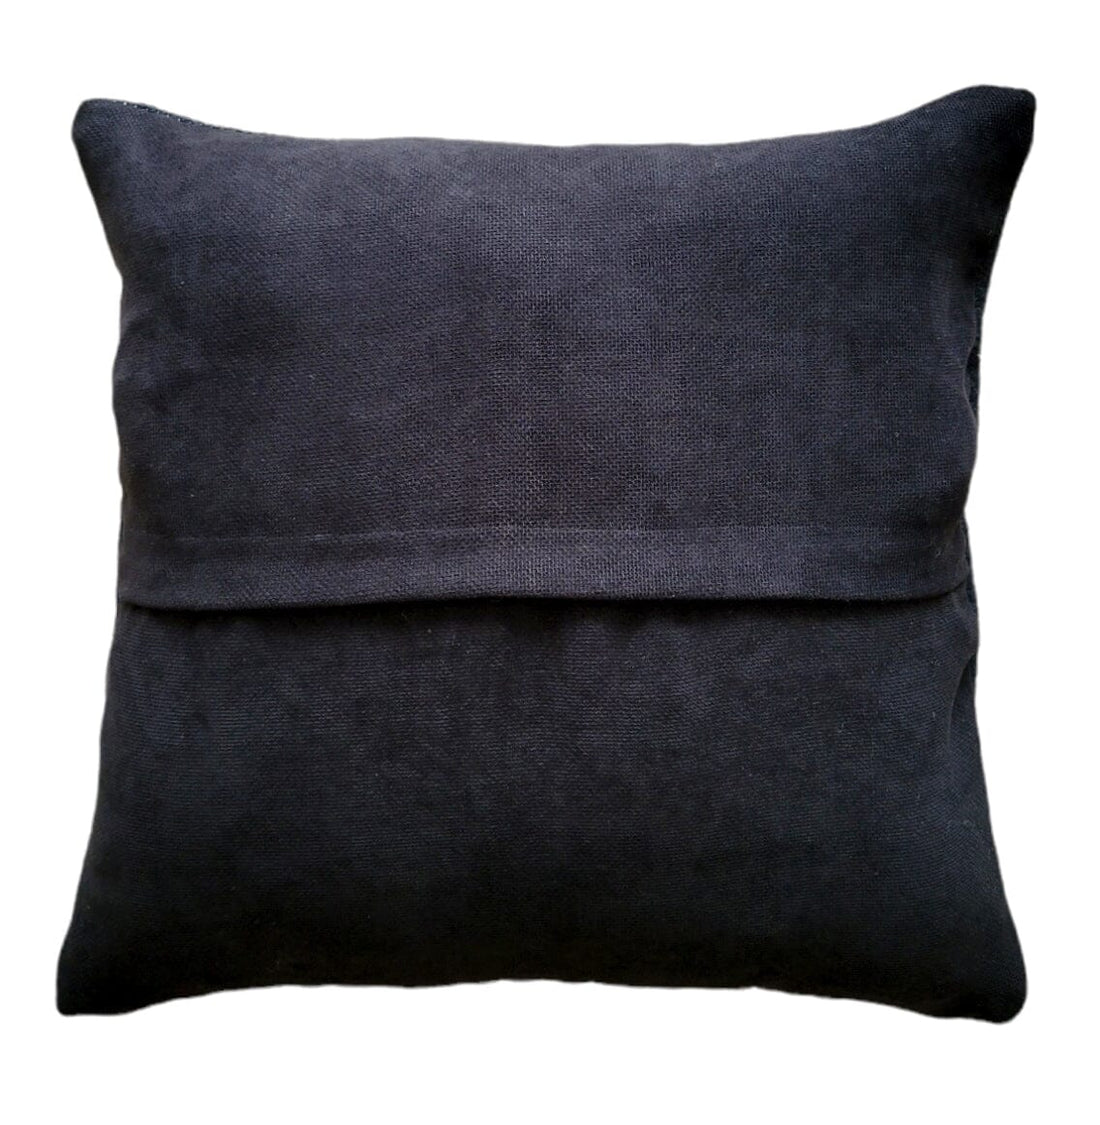 black and white decorative pillow